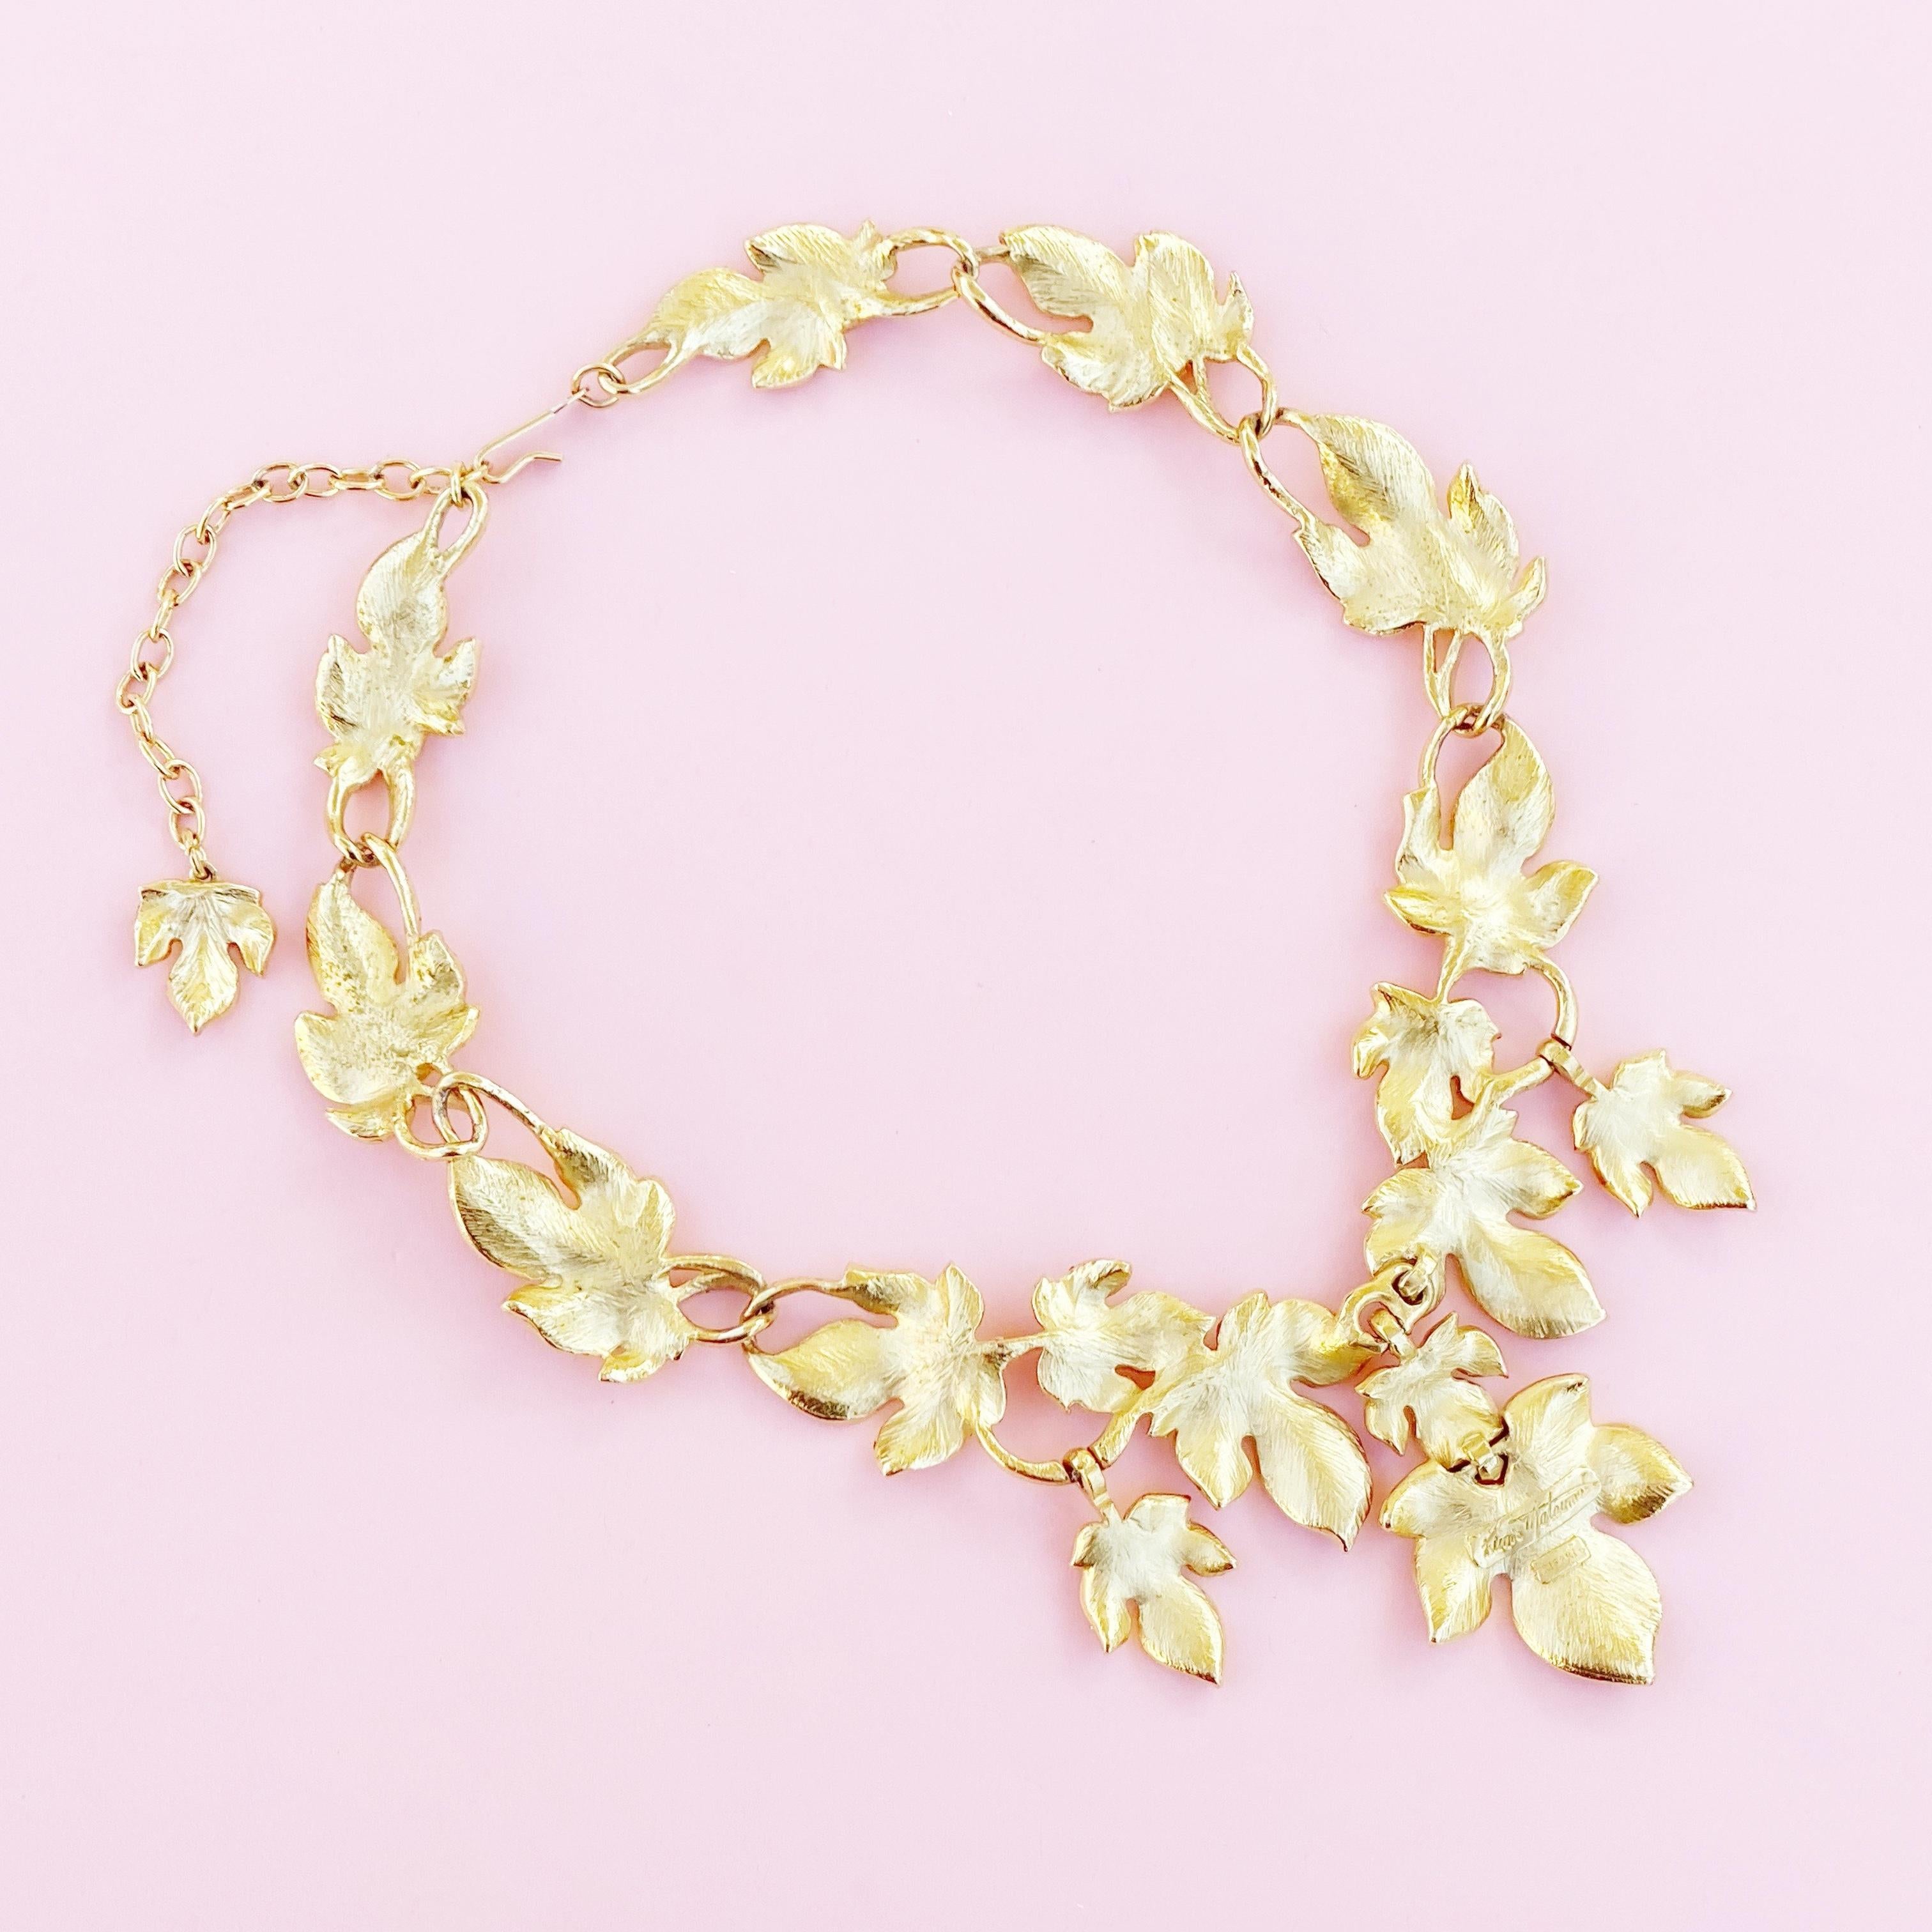 Women's 1970s Gilded Leaves Statement Choker Necklace By Kunio Matsumoto For Trifari